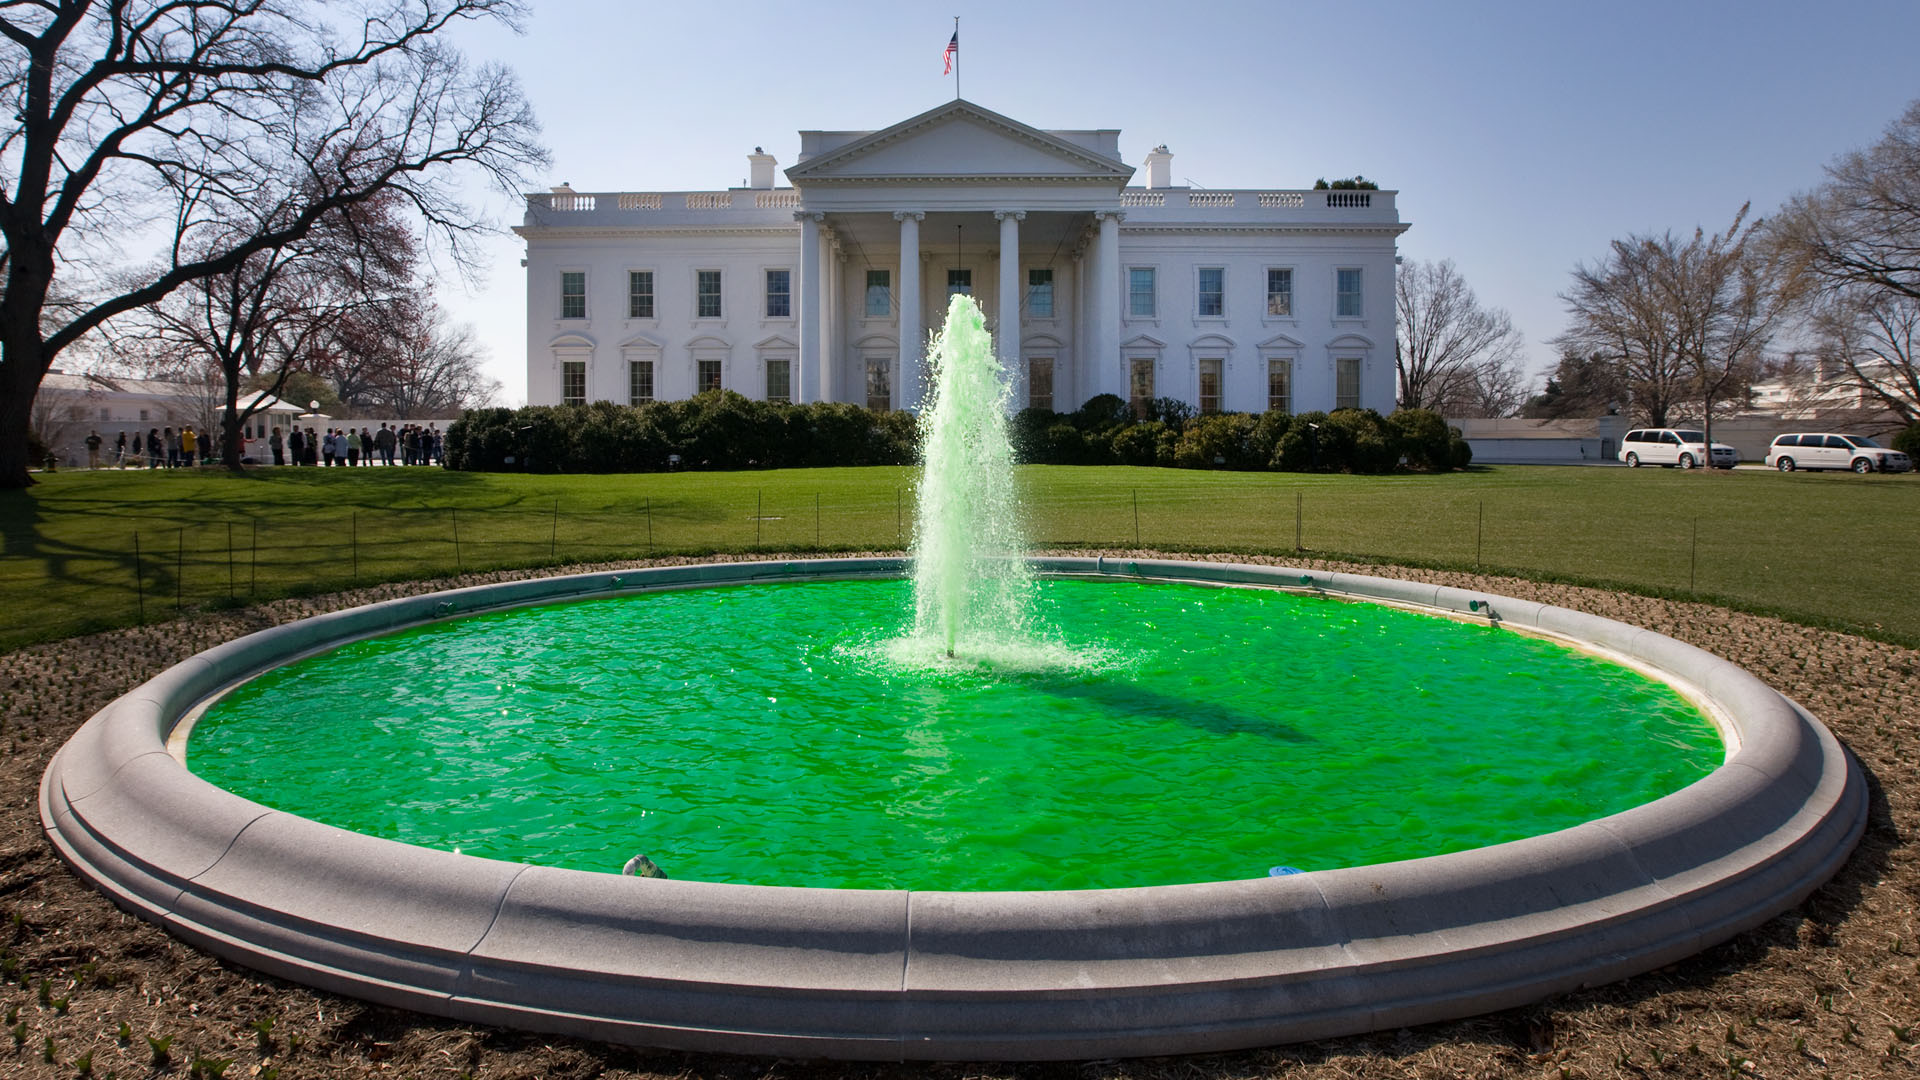 The White House on St. Patrick's Day